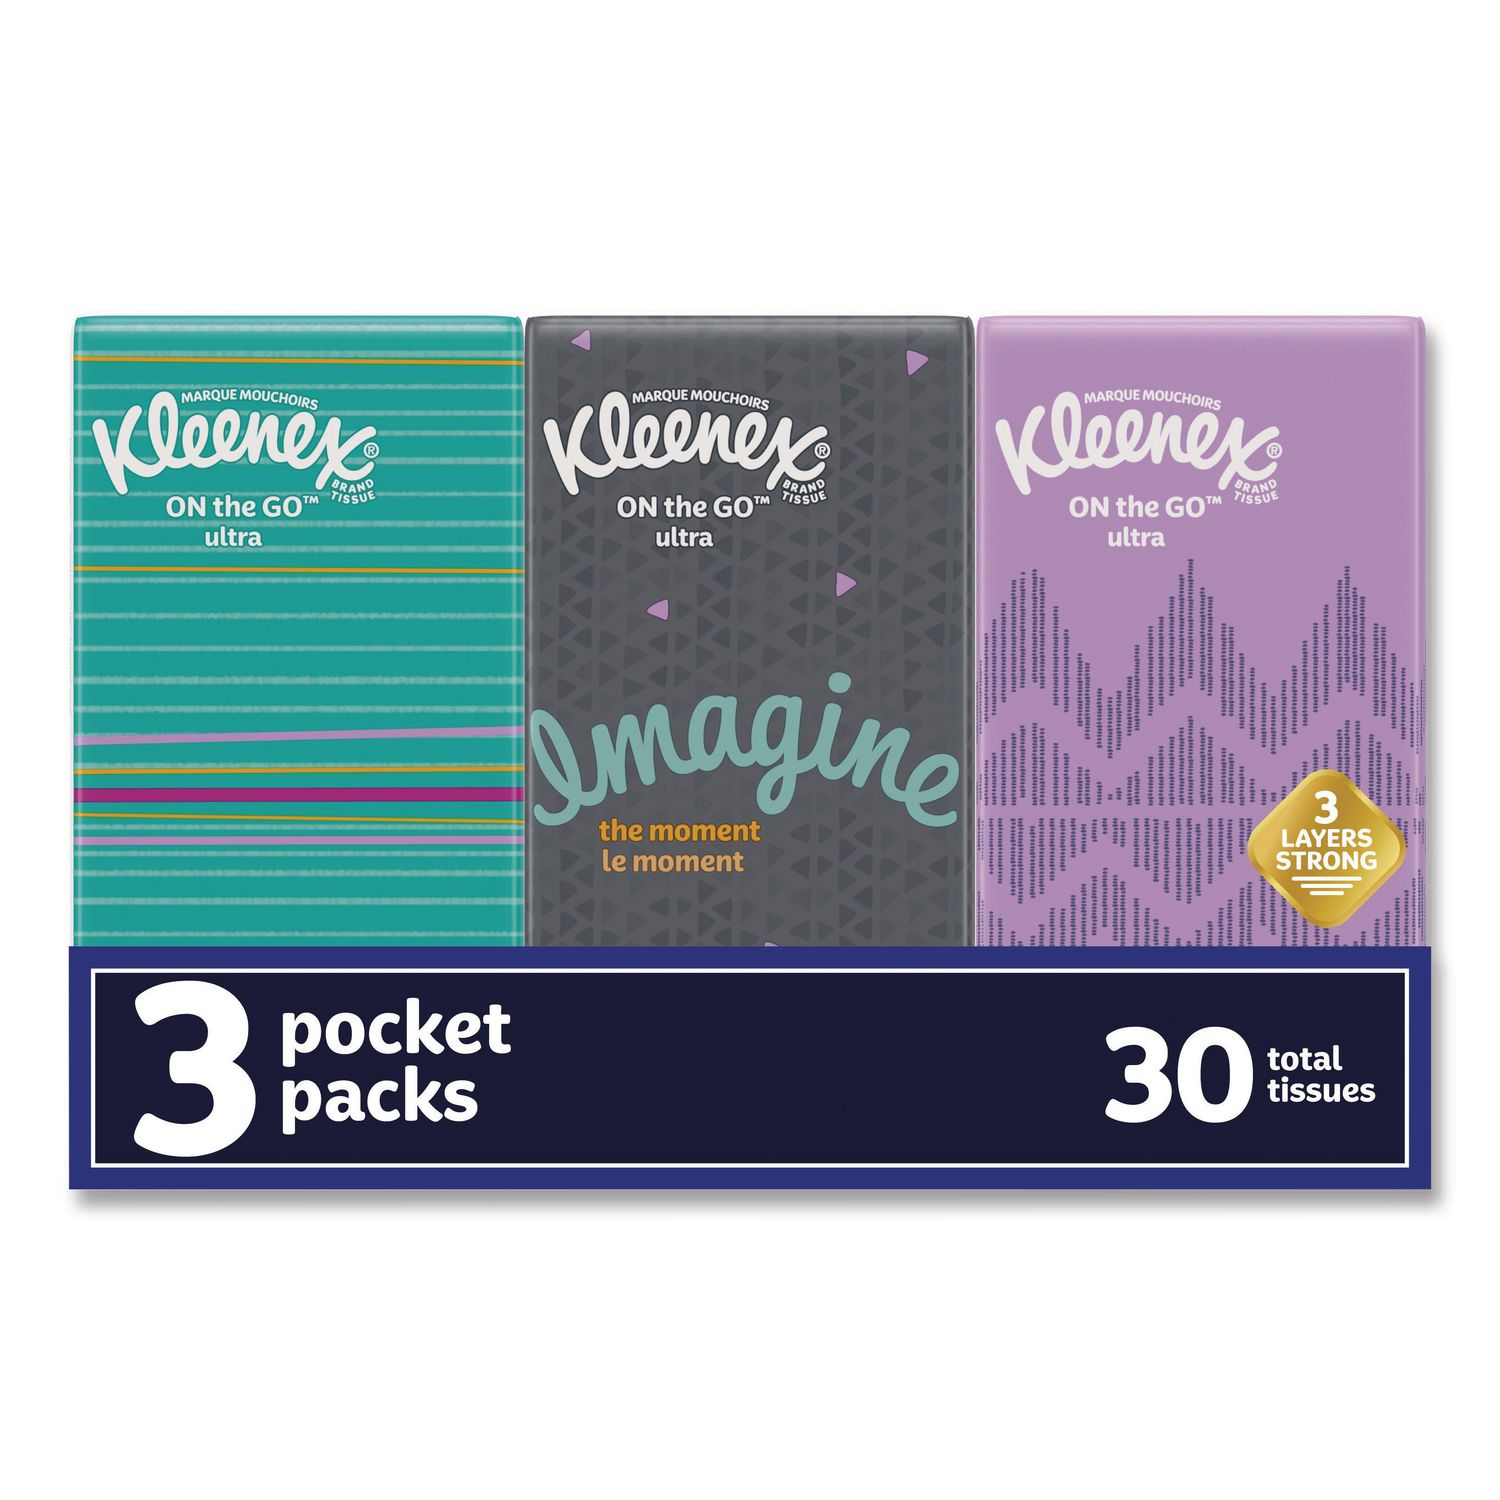 Kleenex 2-Ply White Facial Tissue,230 Count (Pack of 10)